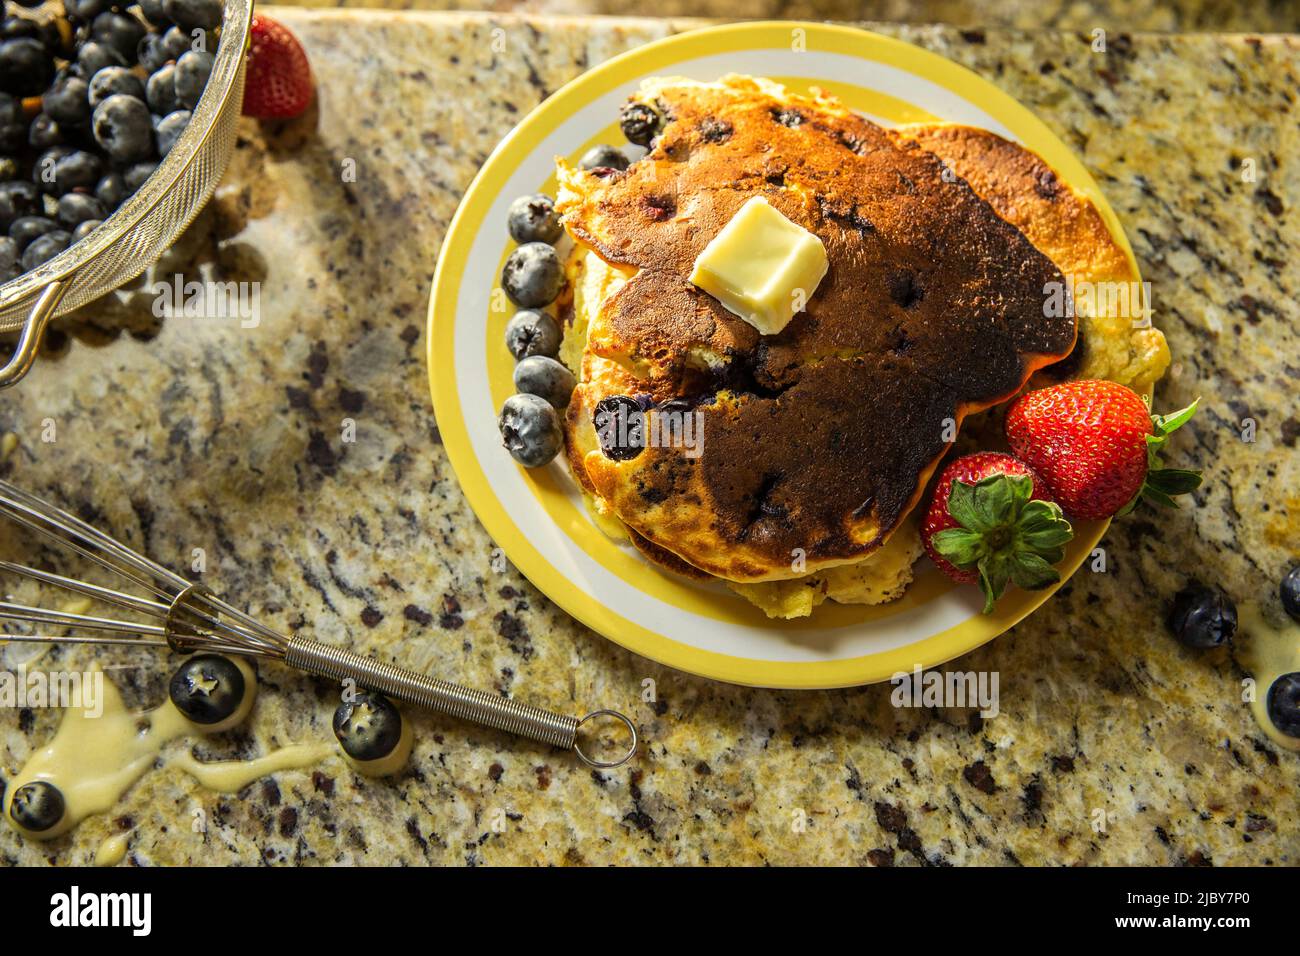 Detail of plate of pancakes with fruit on messy kitchen counter after making blueberry pancakes Stock Photo